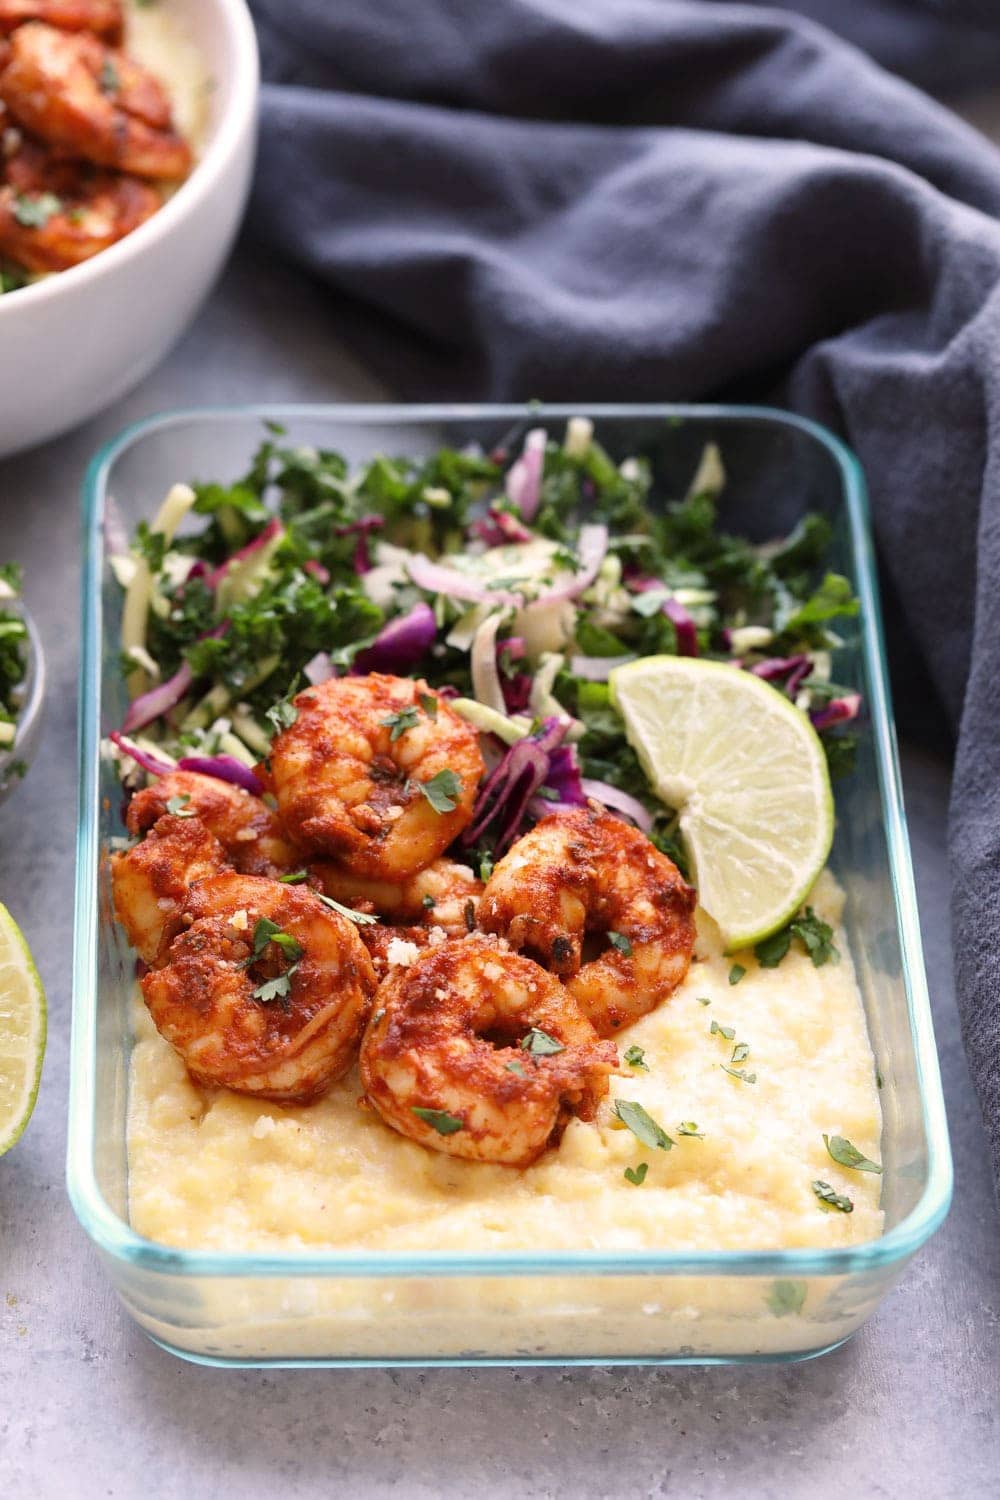 Cajun Shrimp and grits in a meal prep container